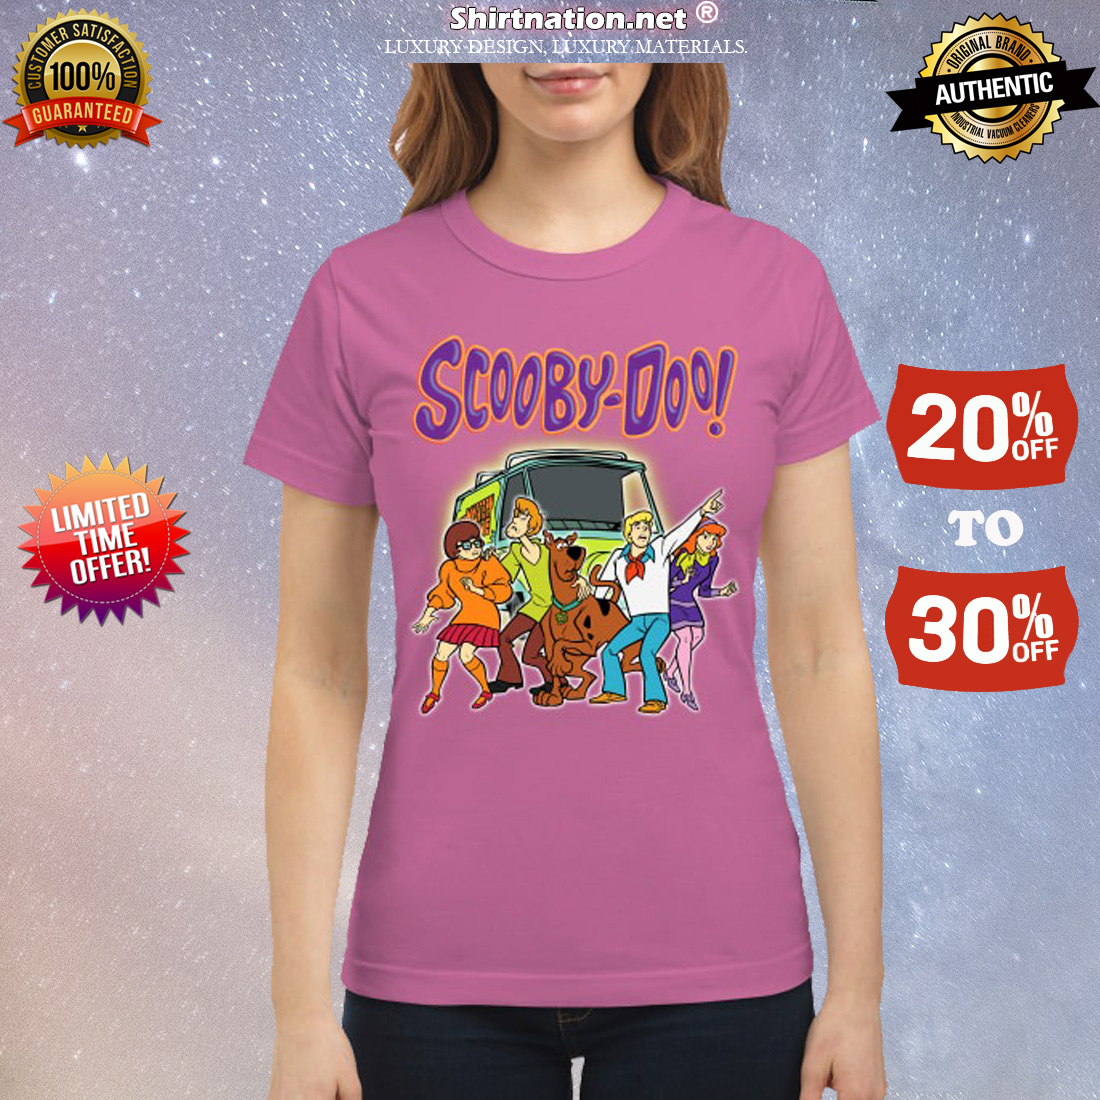 Scooby doo and the mystery machine classic shirt